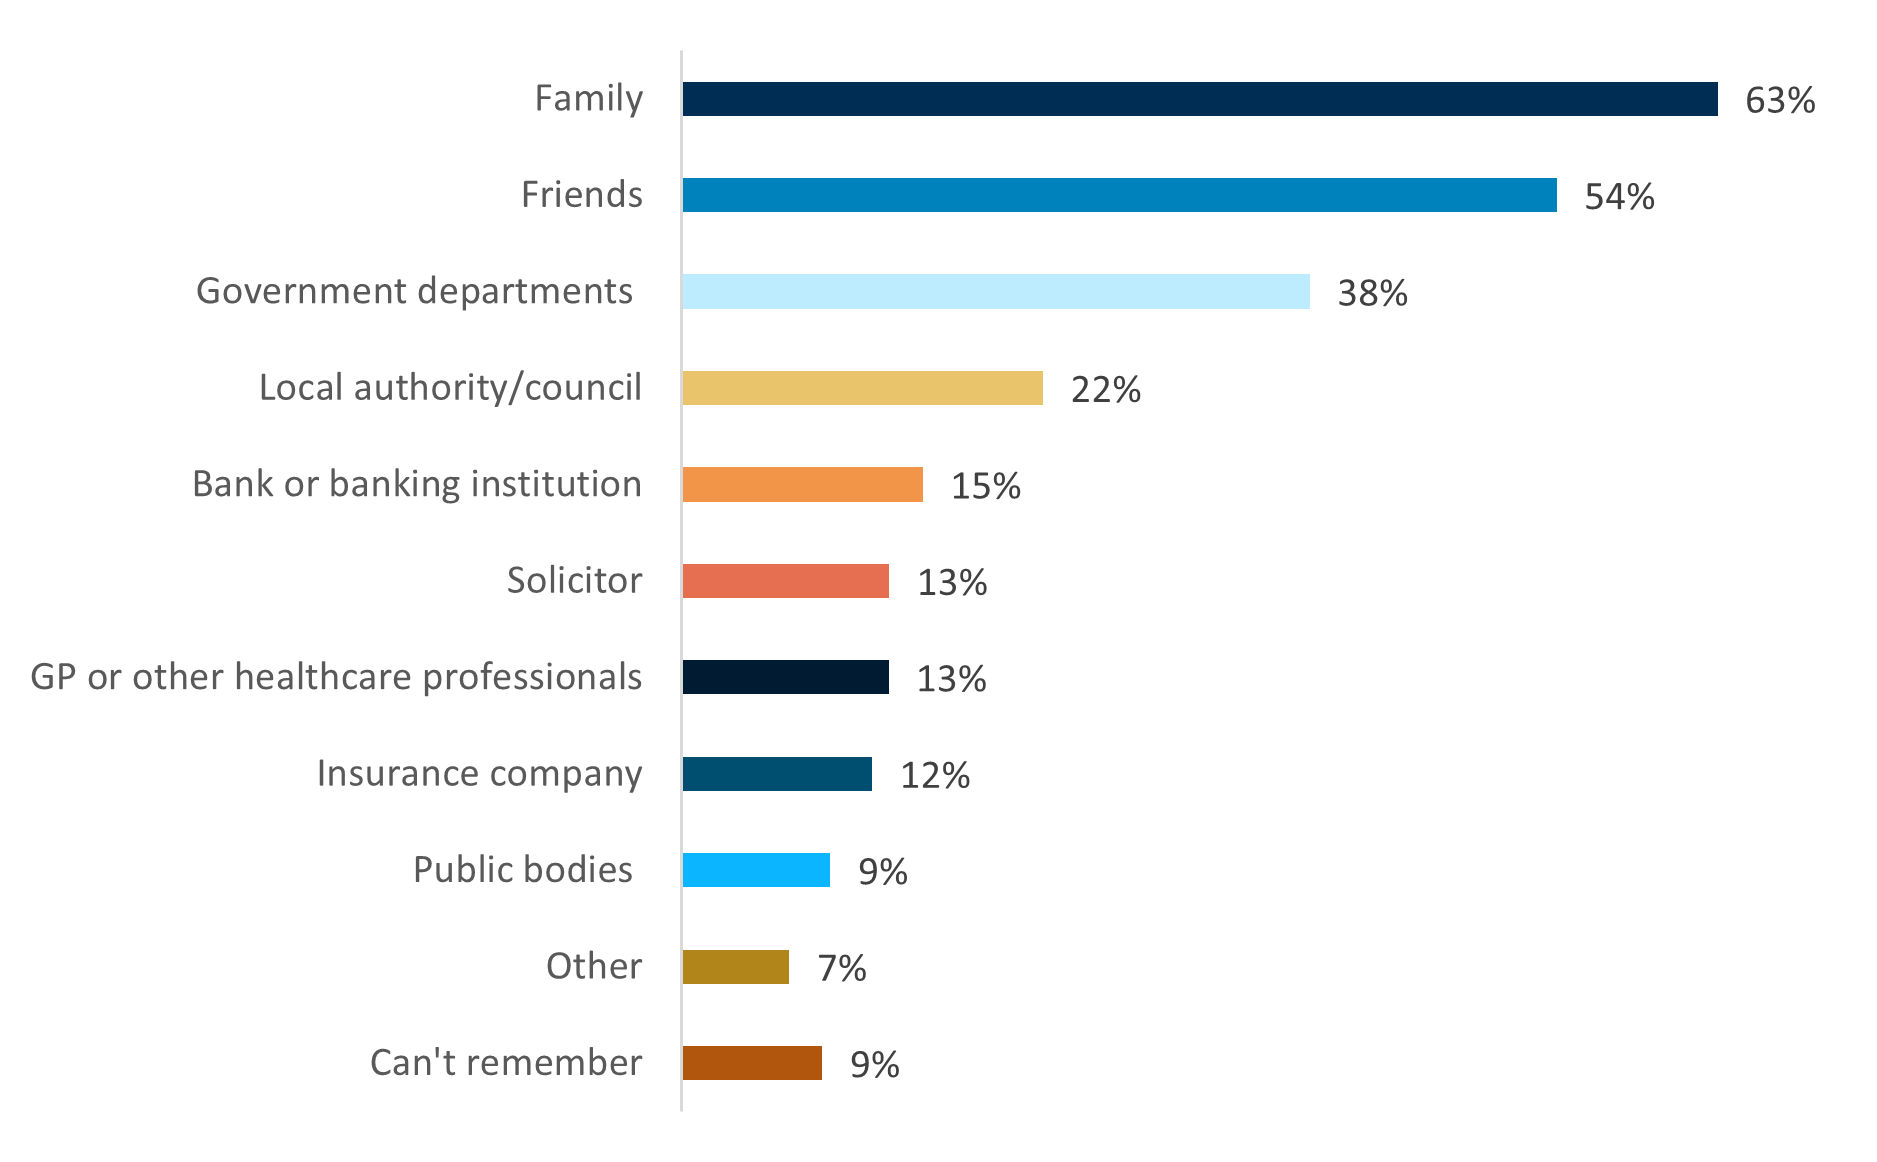 Families are the most likely recipient of letters from consumers at 63%, friends at 54%, government departments at 38%, local authority/council 22%, bank or banking institution 15%, solicitor 13%, GP or other healthcare is 13%, insurance company 12% and public bodies is 9%